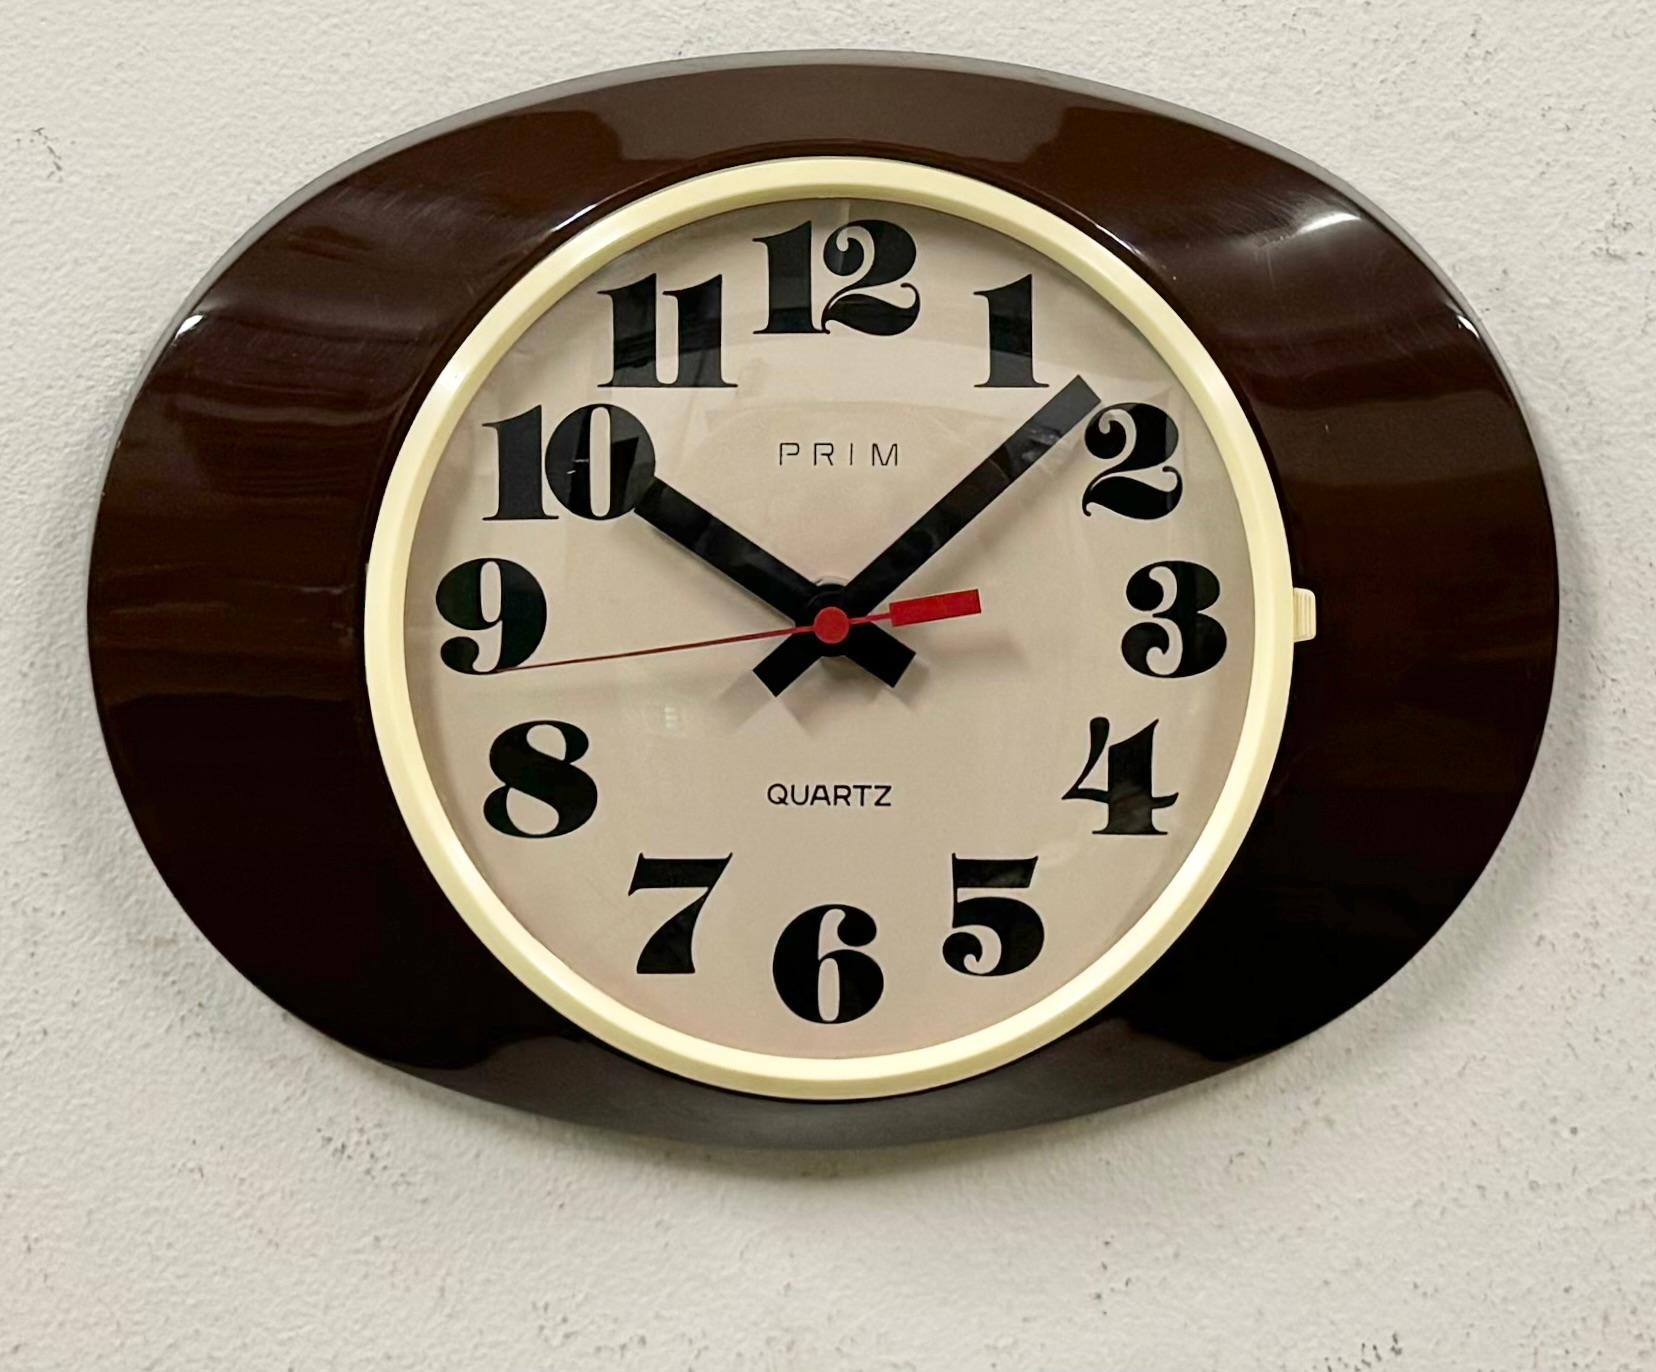 Vintage bakelite wall clock was made by Prim in former Czechoslovakia during the 1970s - 1980s. It features a brown bakelite body with white bakelite clockface and a convex clear glass cover. The original clockwork works perfectly and requires one